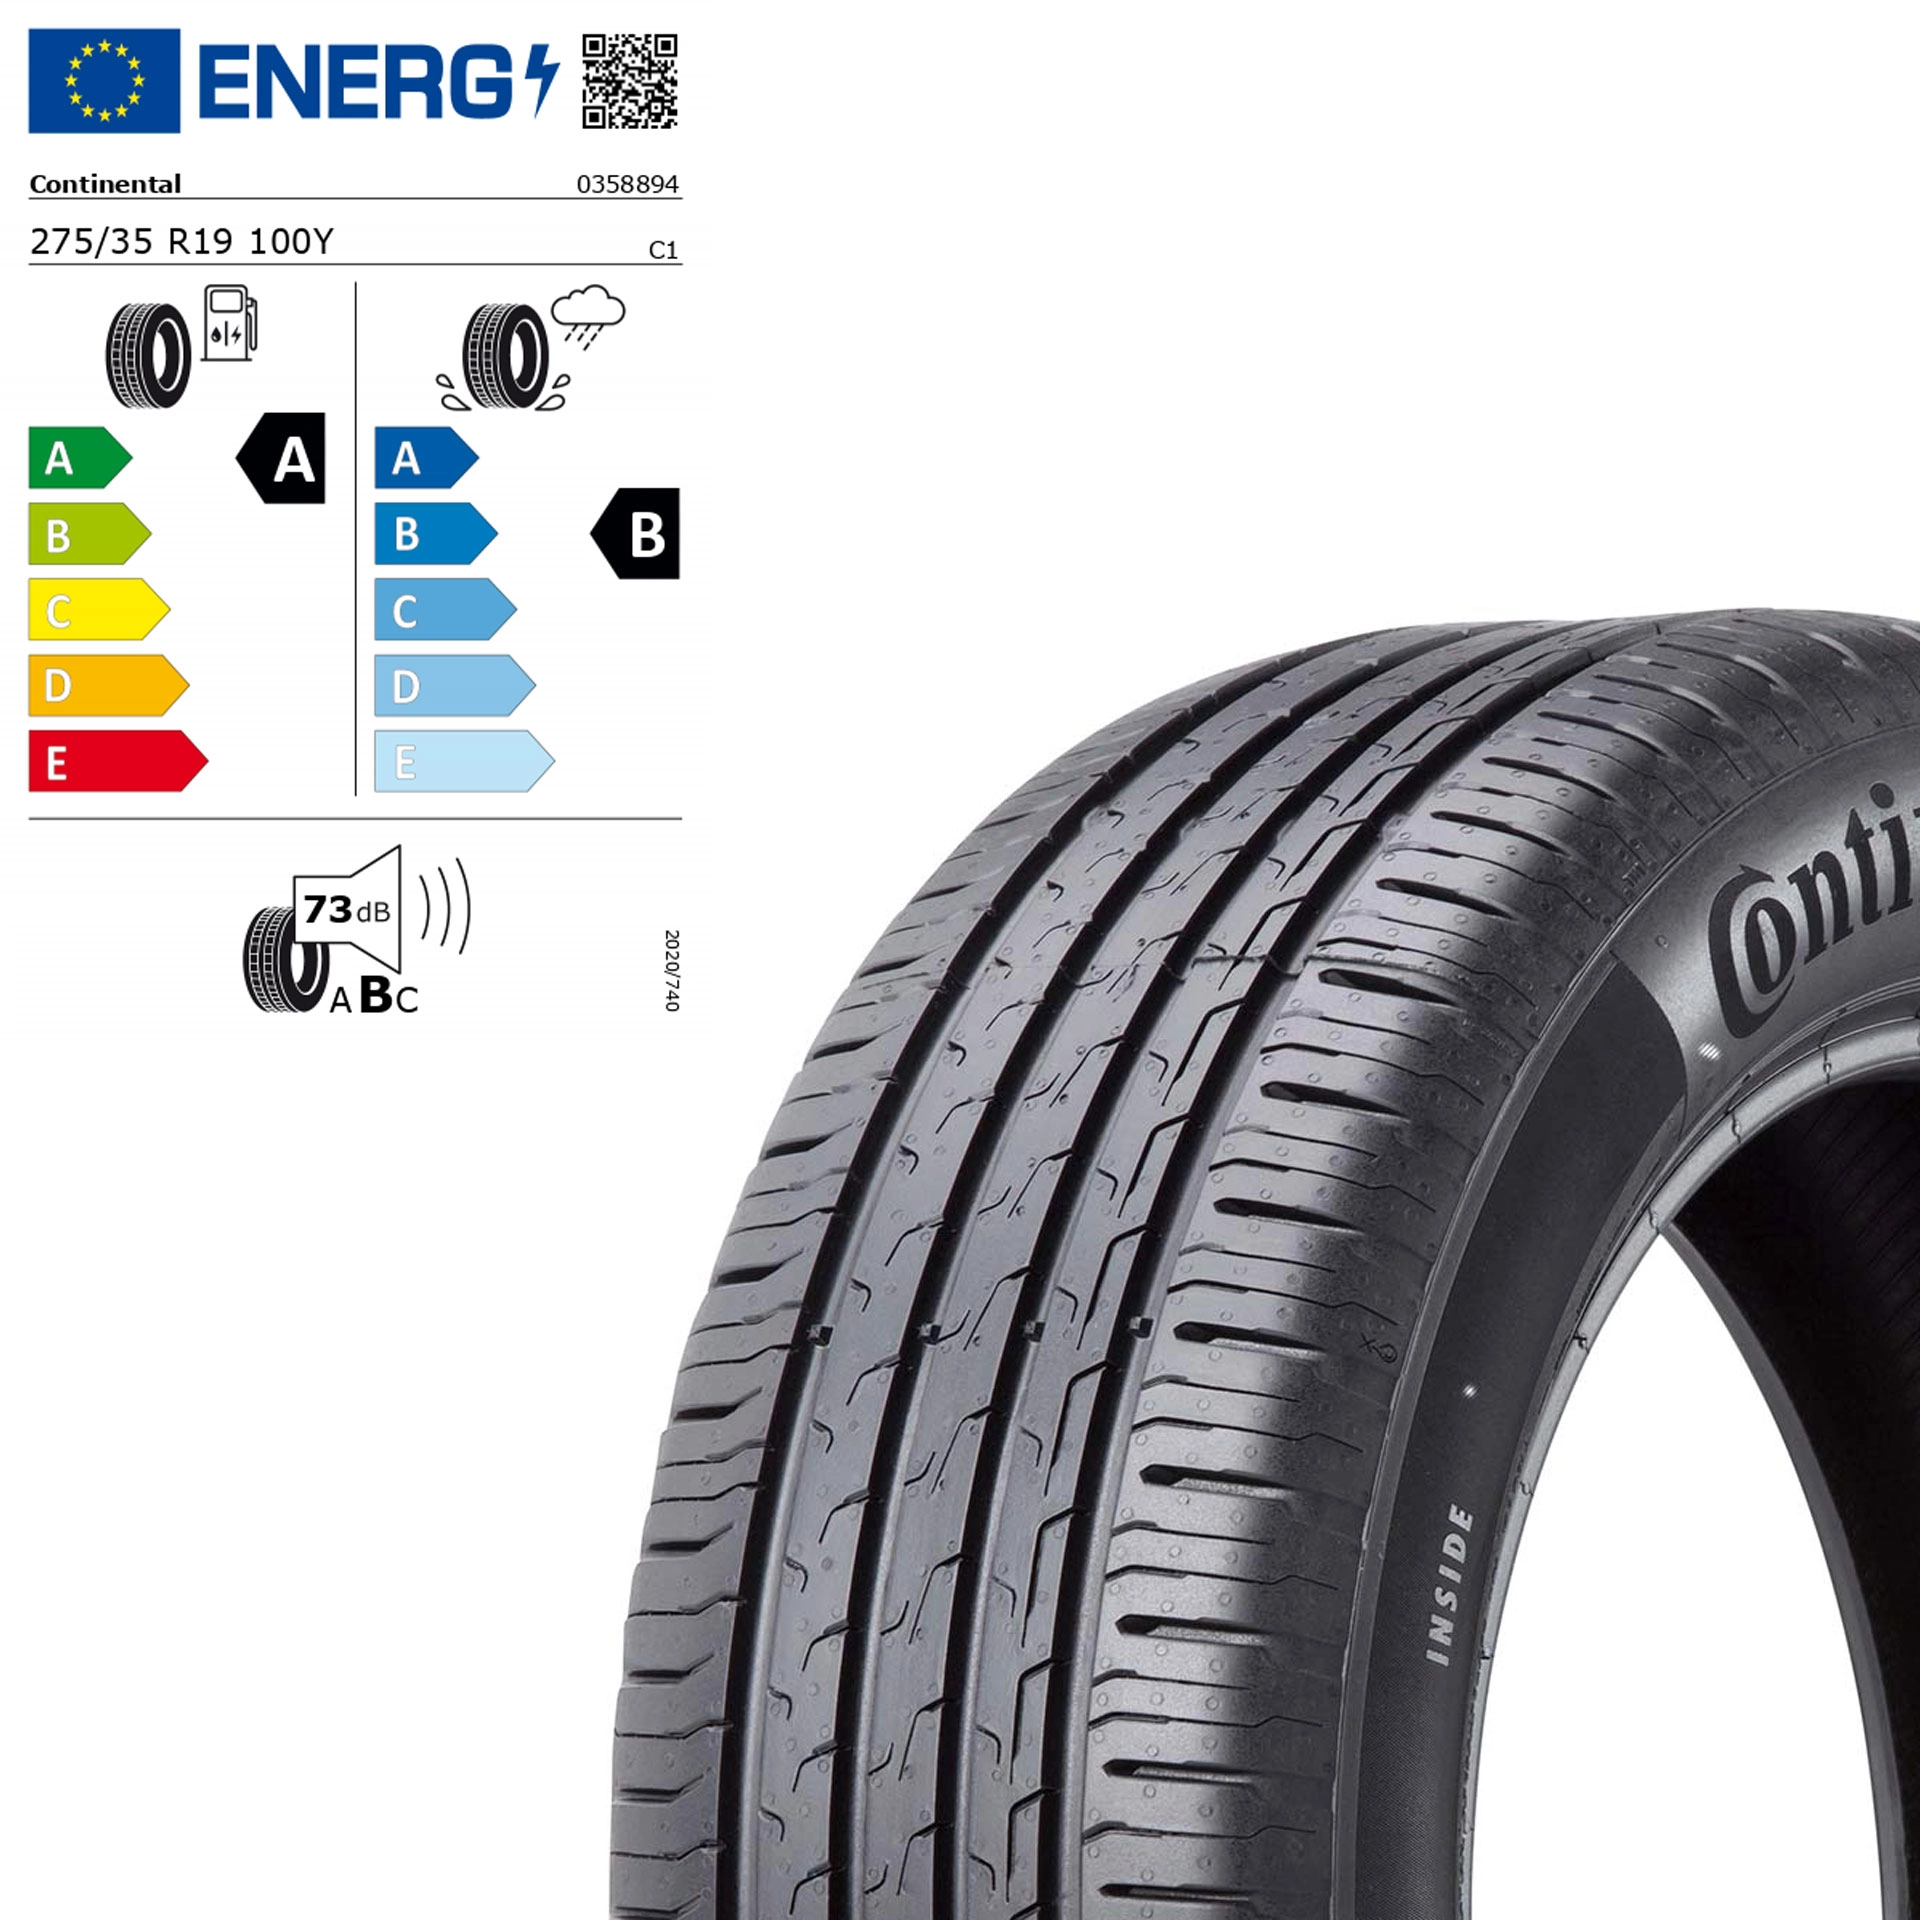 275/35 R19 100Y Continental EcoContact 6 MO Sommerreifen Q44001111283A